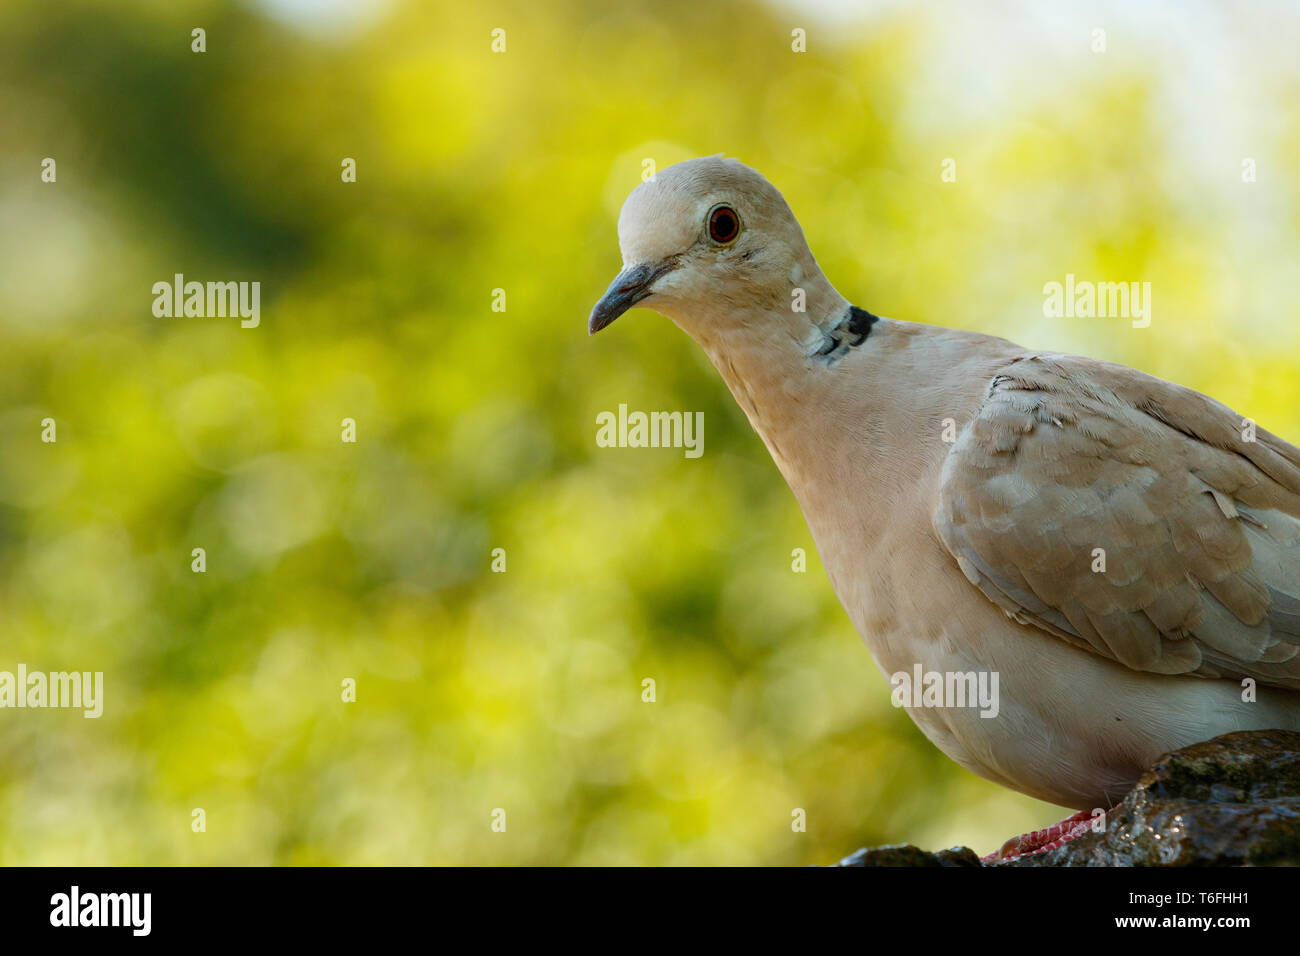 Bird sitting on a rock and turning his head Stock Photo